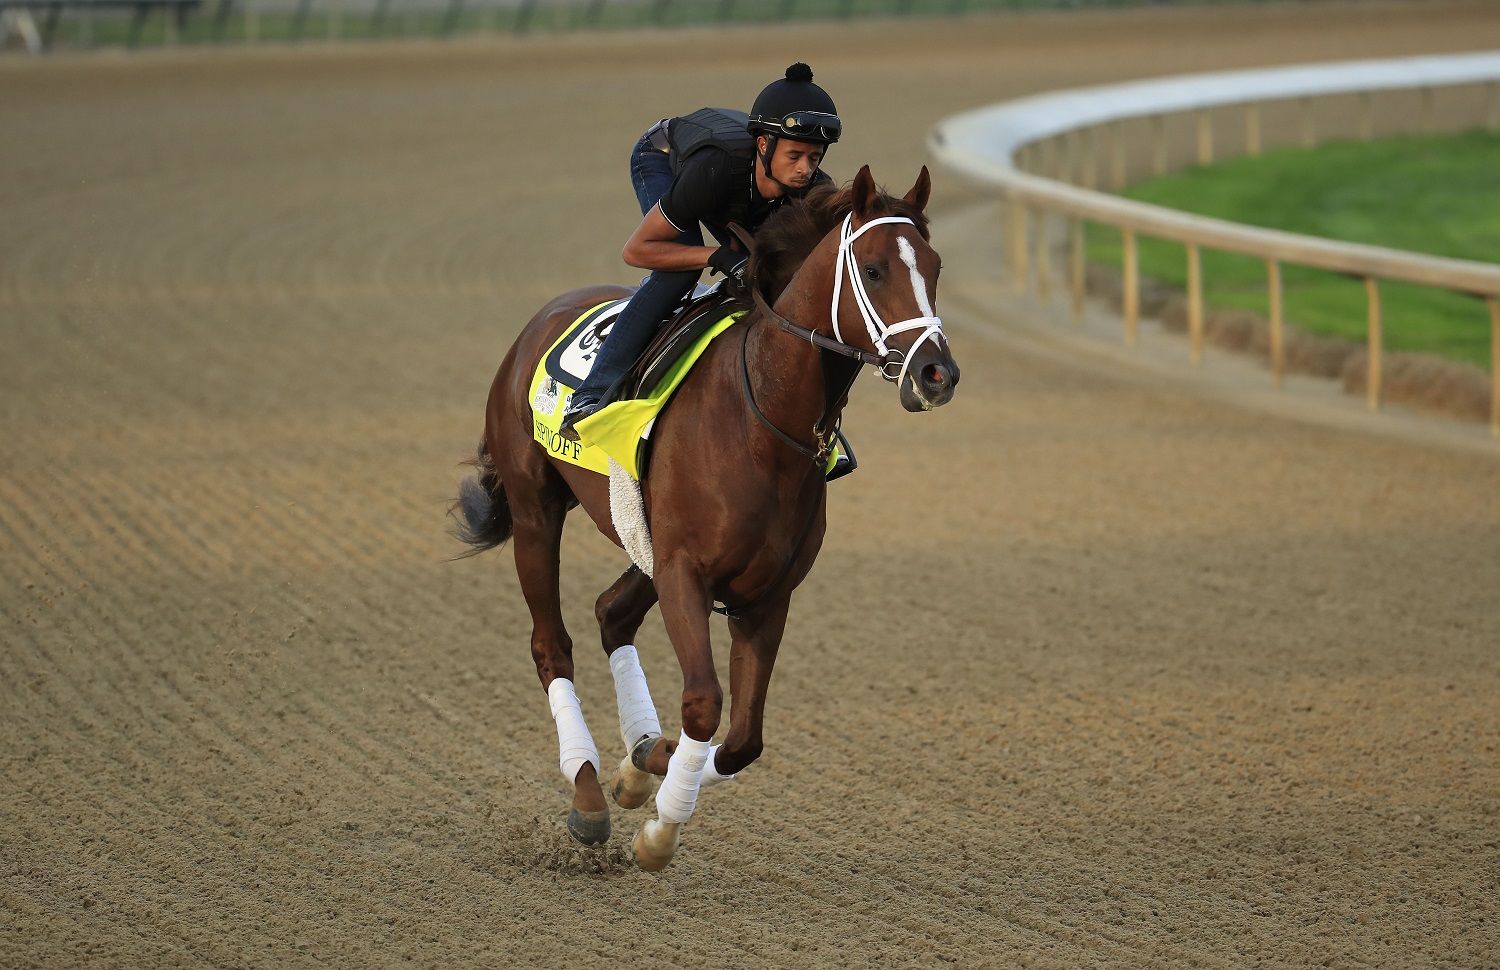 LOUISVILLE, KENTUCKY - MAY 01: Spinoff runs on the track during morning training for the Kentucky Derby at Churchill Downs on May 1, 2019 in Louisville, Kentucky. (Photo by Andy Lyons/Getty Images)